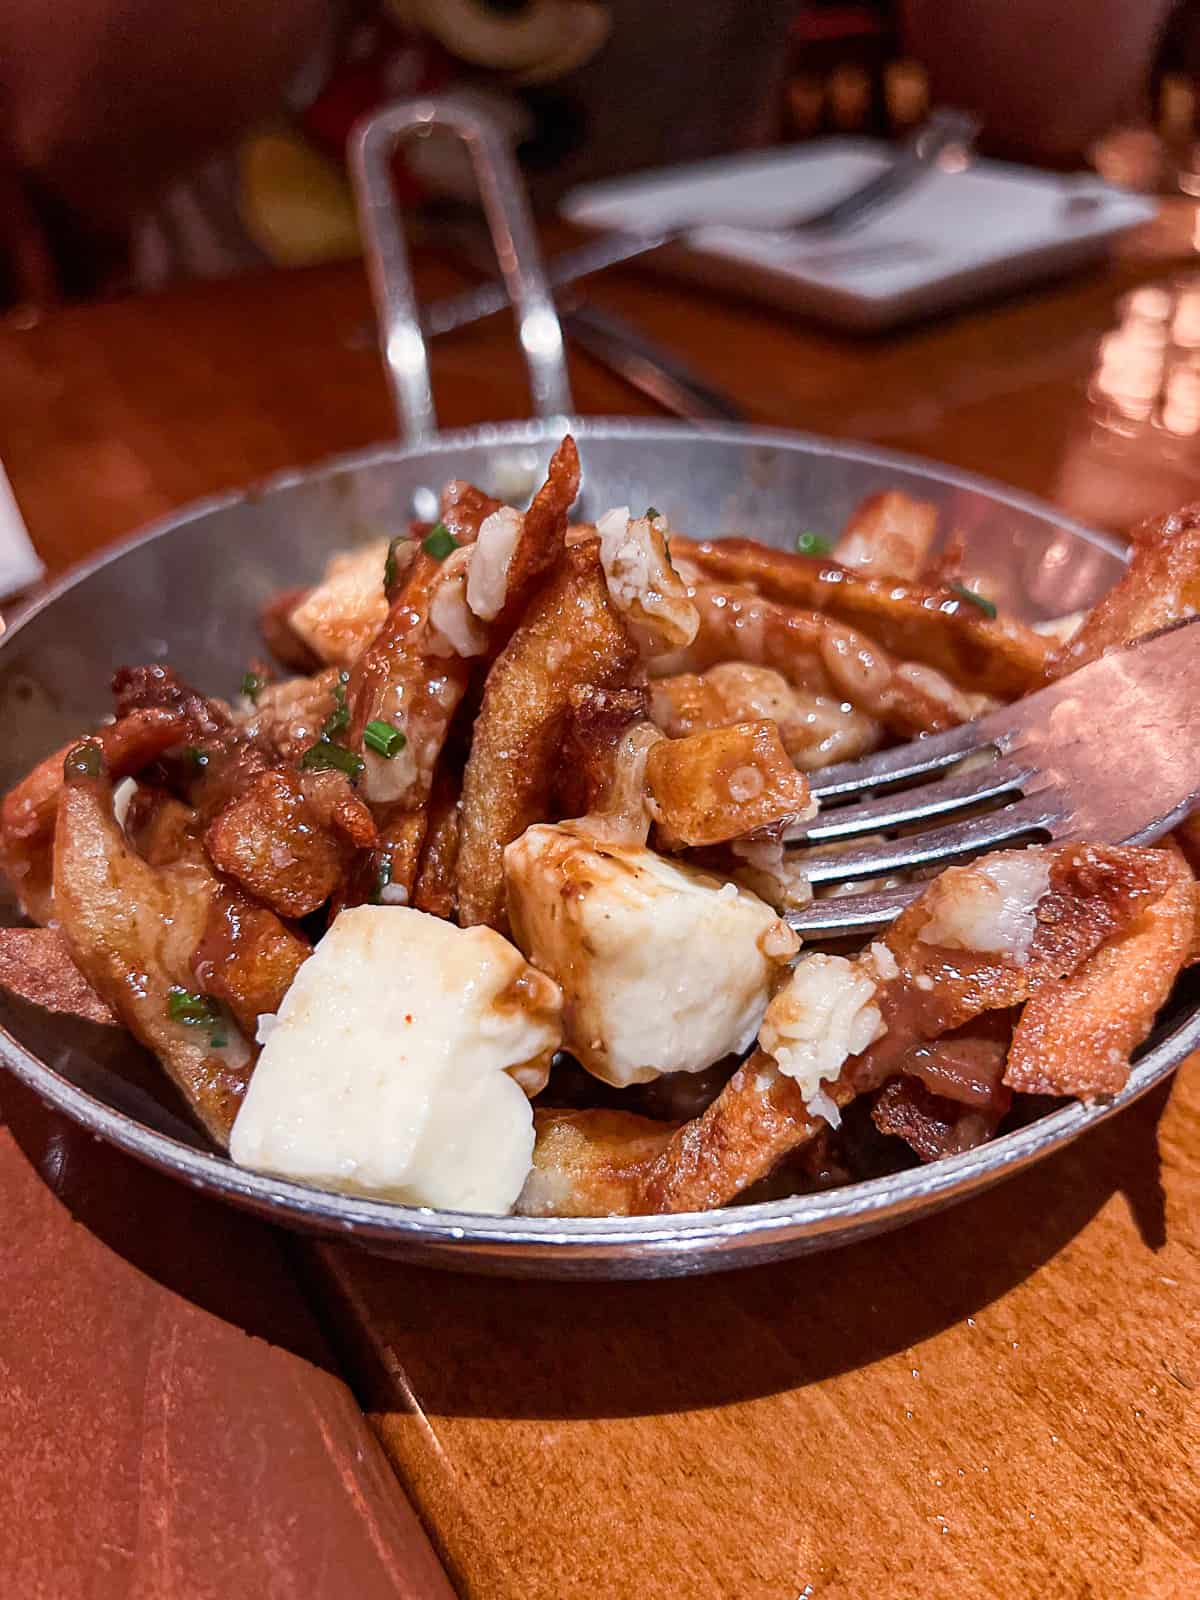 Cheese Curd and Fries Poutine at Le Cellier Restaurant in Canada Pavilion at Disney World Epcot Park